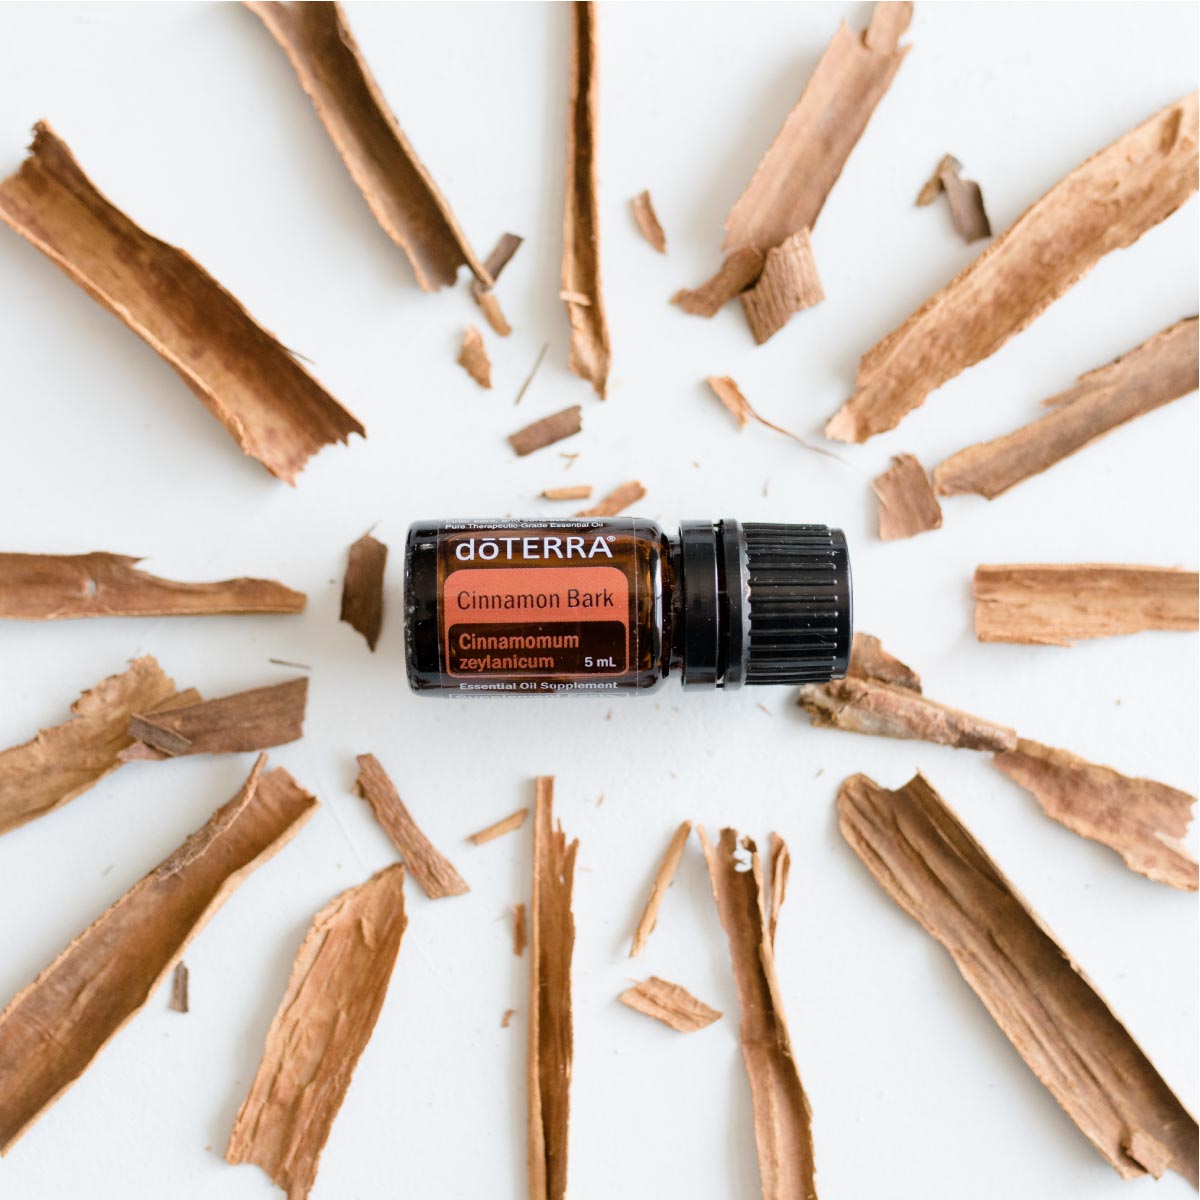 Cinnamon bark and bottle of Cinnamon essential oil. Wondering about the benefits of Cinnamon essential oil? Cinnamon bark oil has benefits and uses for health, massage, cooking, and more.